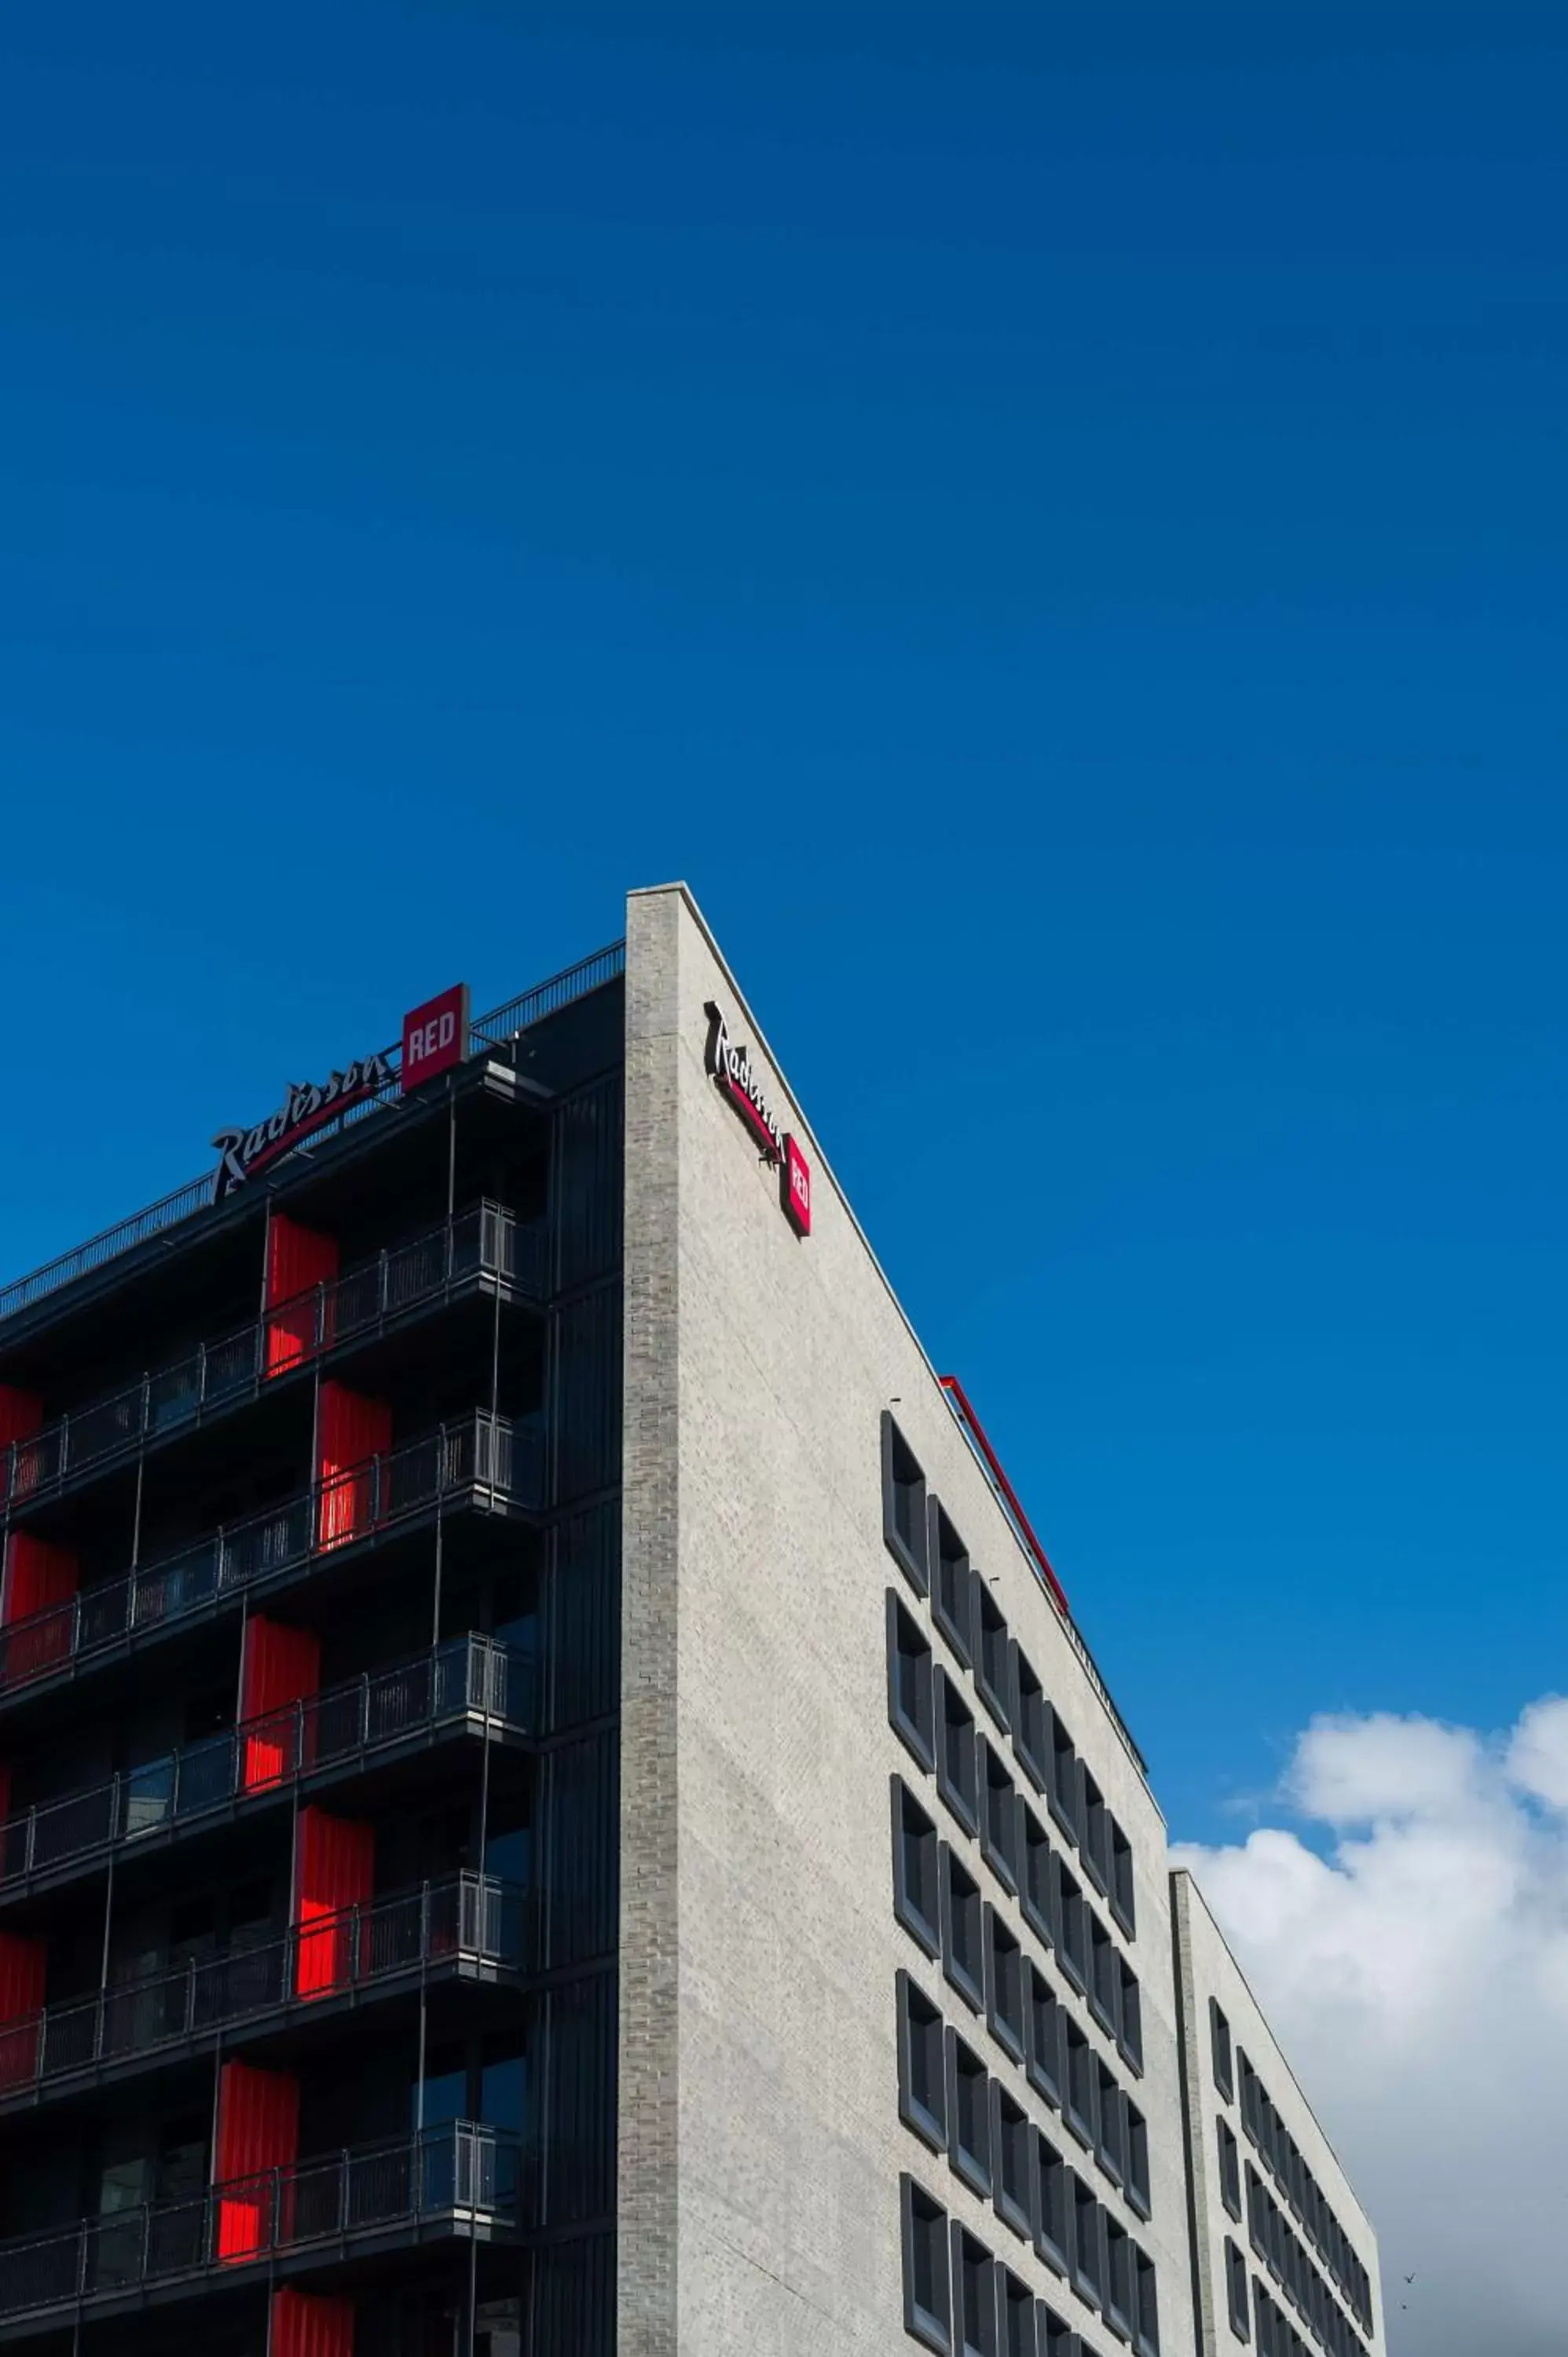 Property Building in Radisson RED Hotel V&A Waterfront Cape Town